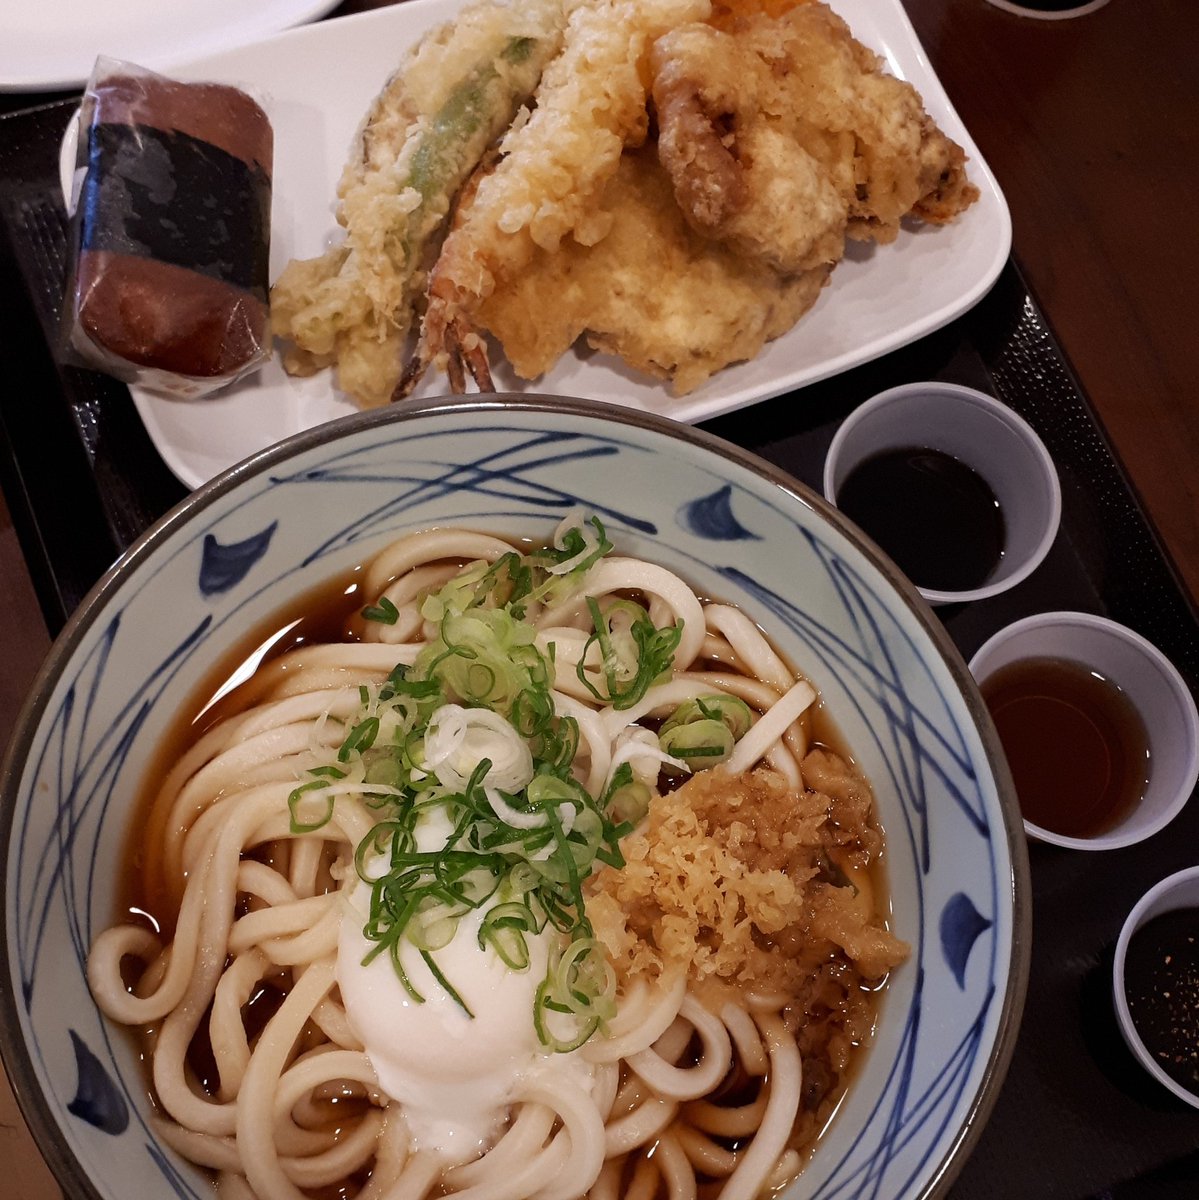 Some places aren't special or unqiue. But some places have the basic things down to a science and are absolutely on point. One of the best Udon & Tempura joints in #Honolulu #Hawaii. #MarukameUDON